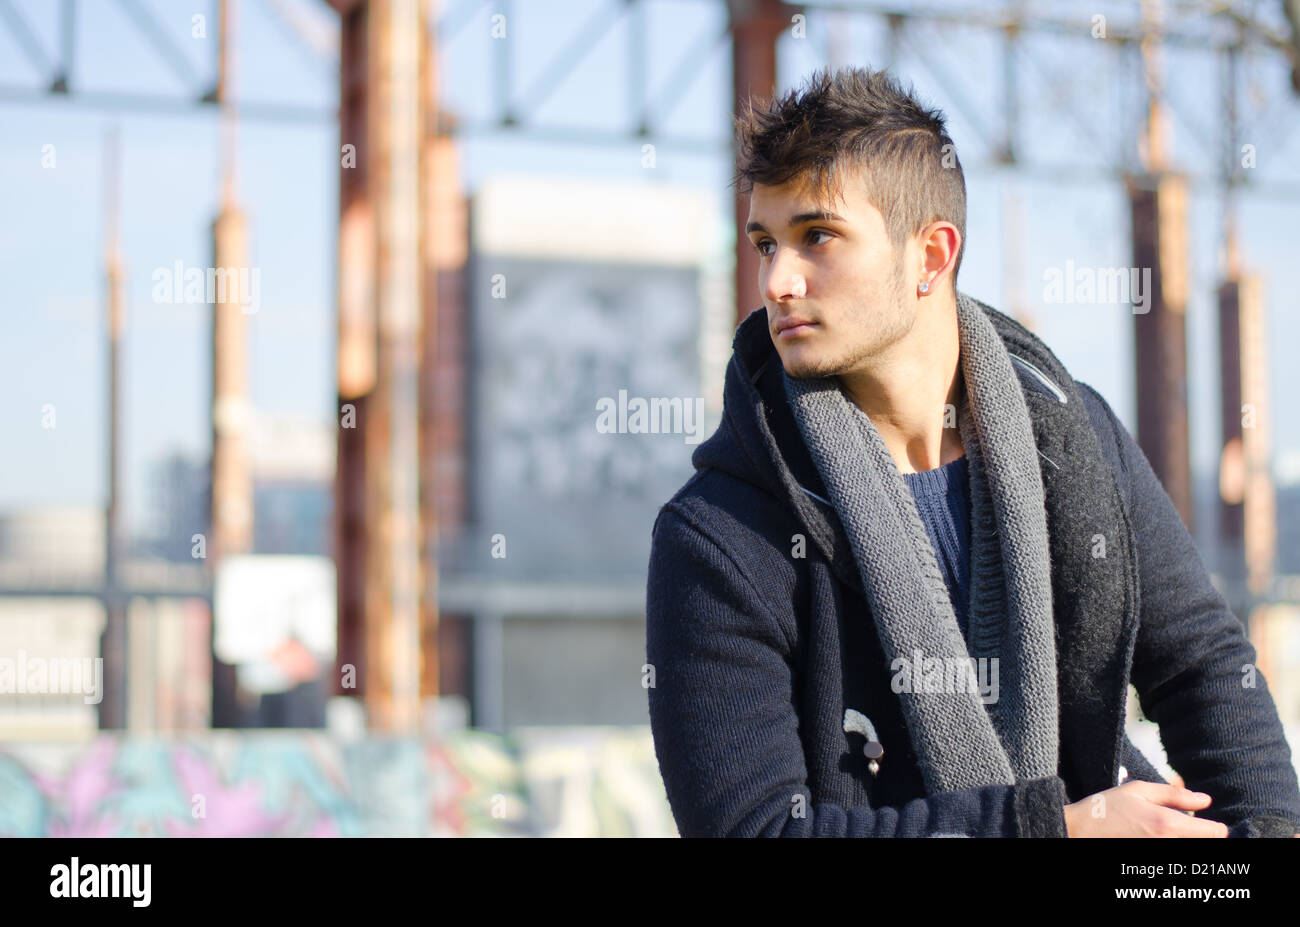 Handsome young man in urban environment, large copy-space Stock Photo